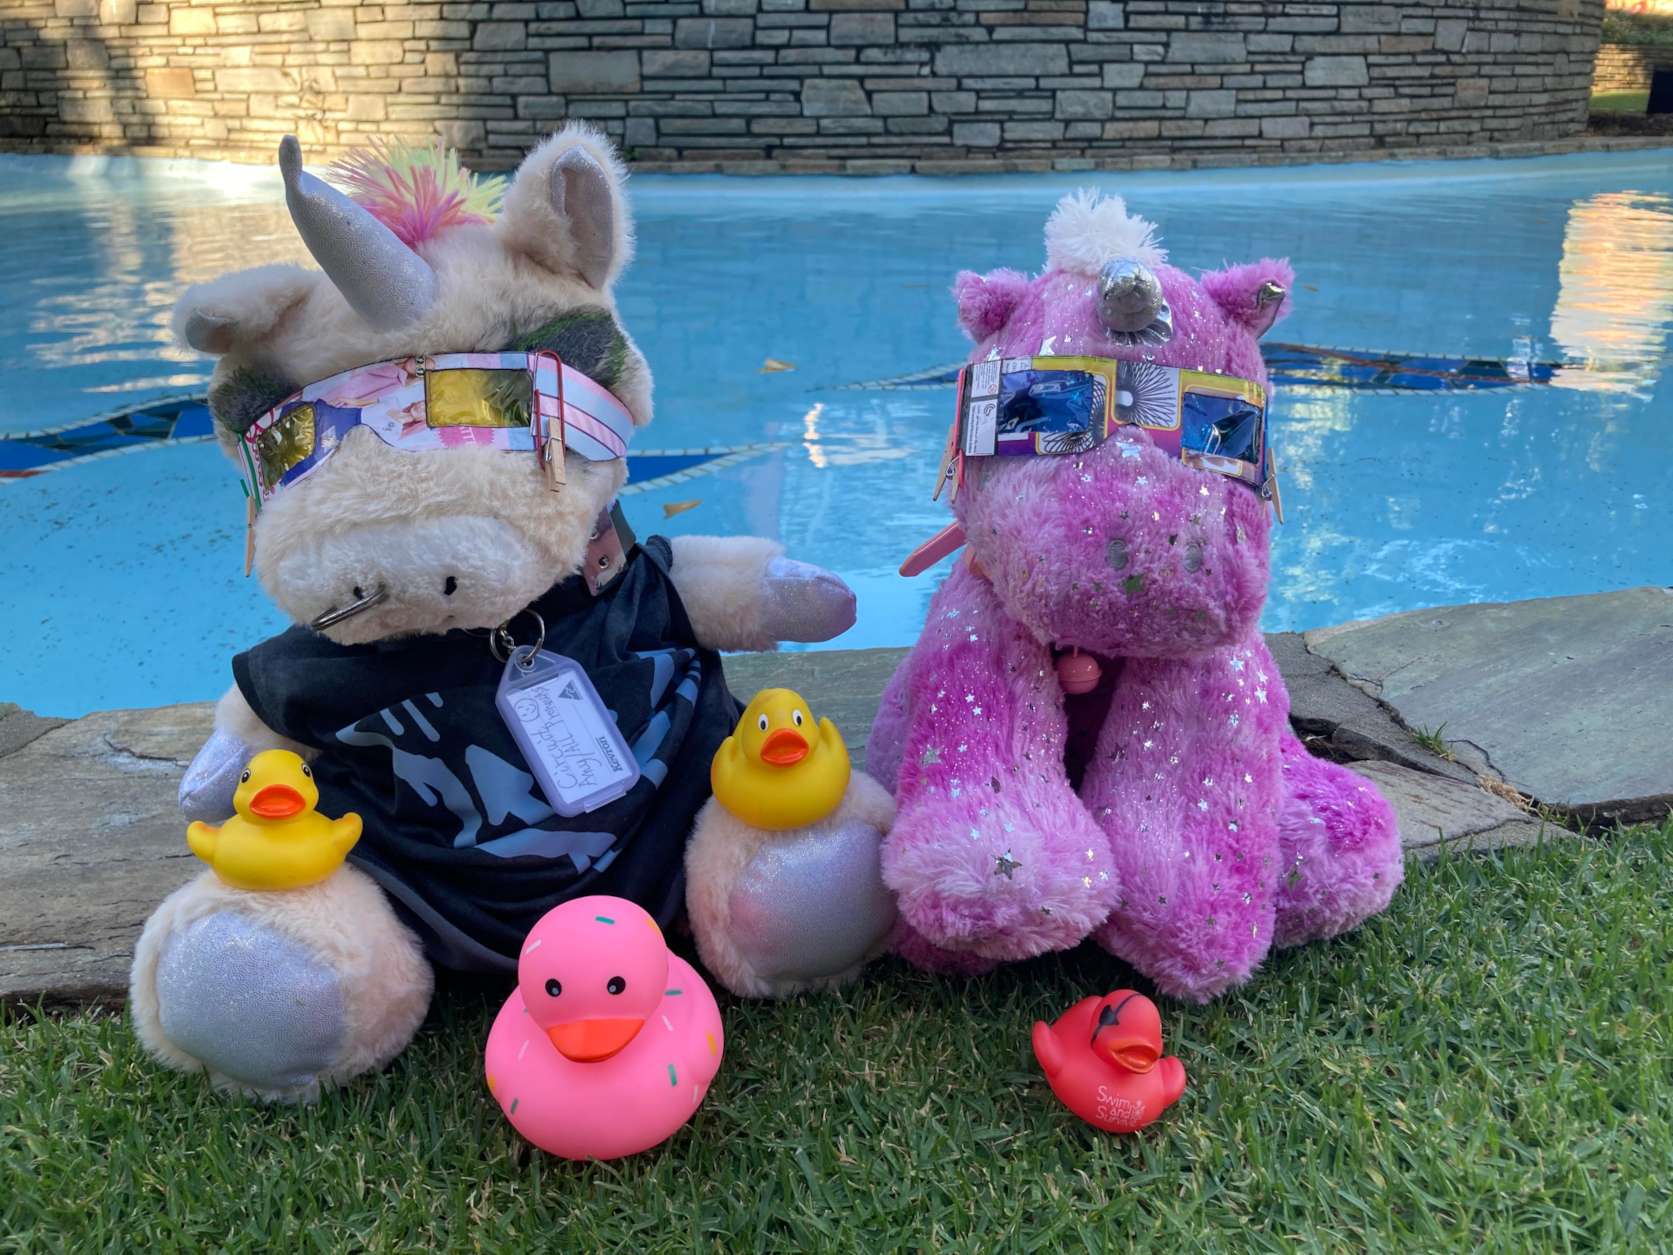 Goth and pink unicorn stuffies, stylish glasses. 4 duckies, 1 pink, 1 red, 2 yellow. Water feature.